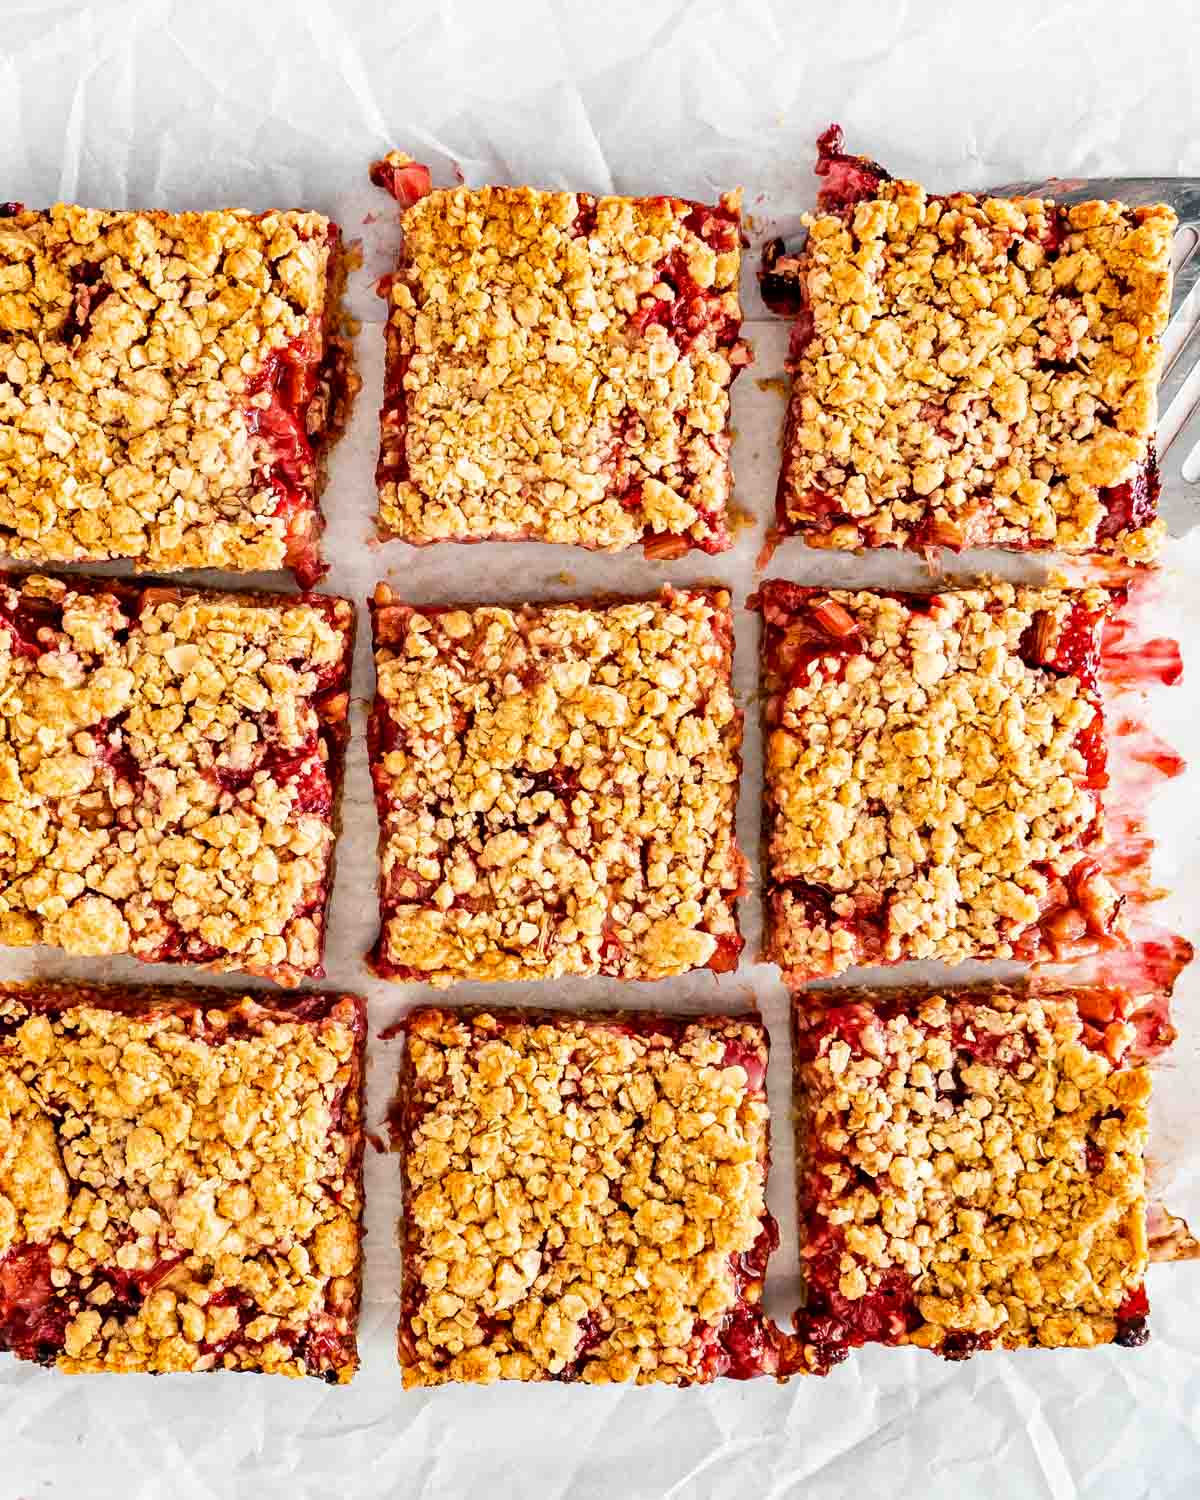 strawberry rhubarb bars cut into pieces on a piece of parchment paper.